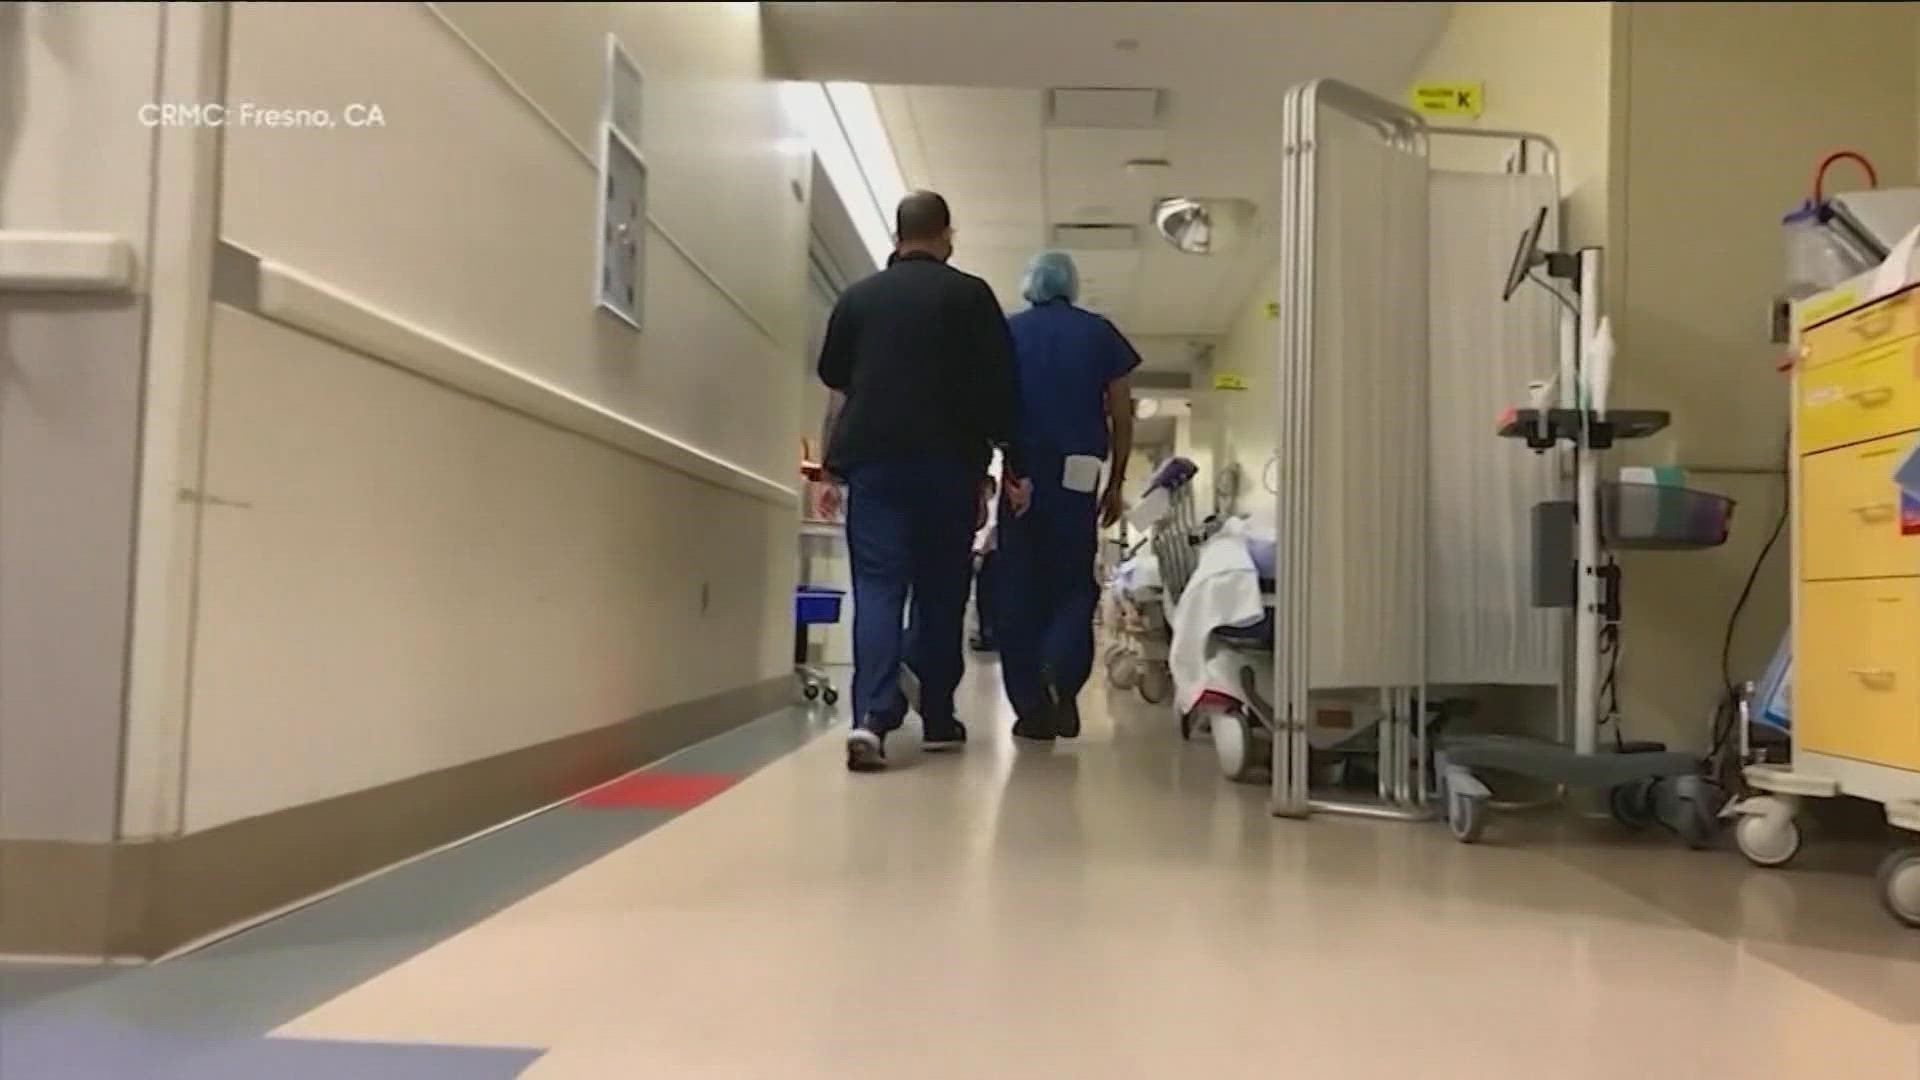 A new report shows the state of hospitals across Texas. Since the start of the COVID-19 pandemic, hospitals have been struggling, especially rural ones.